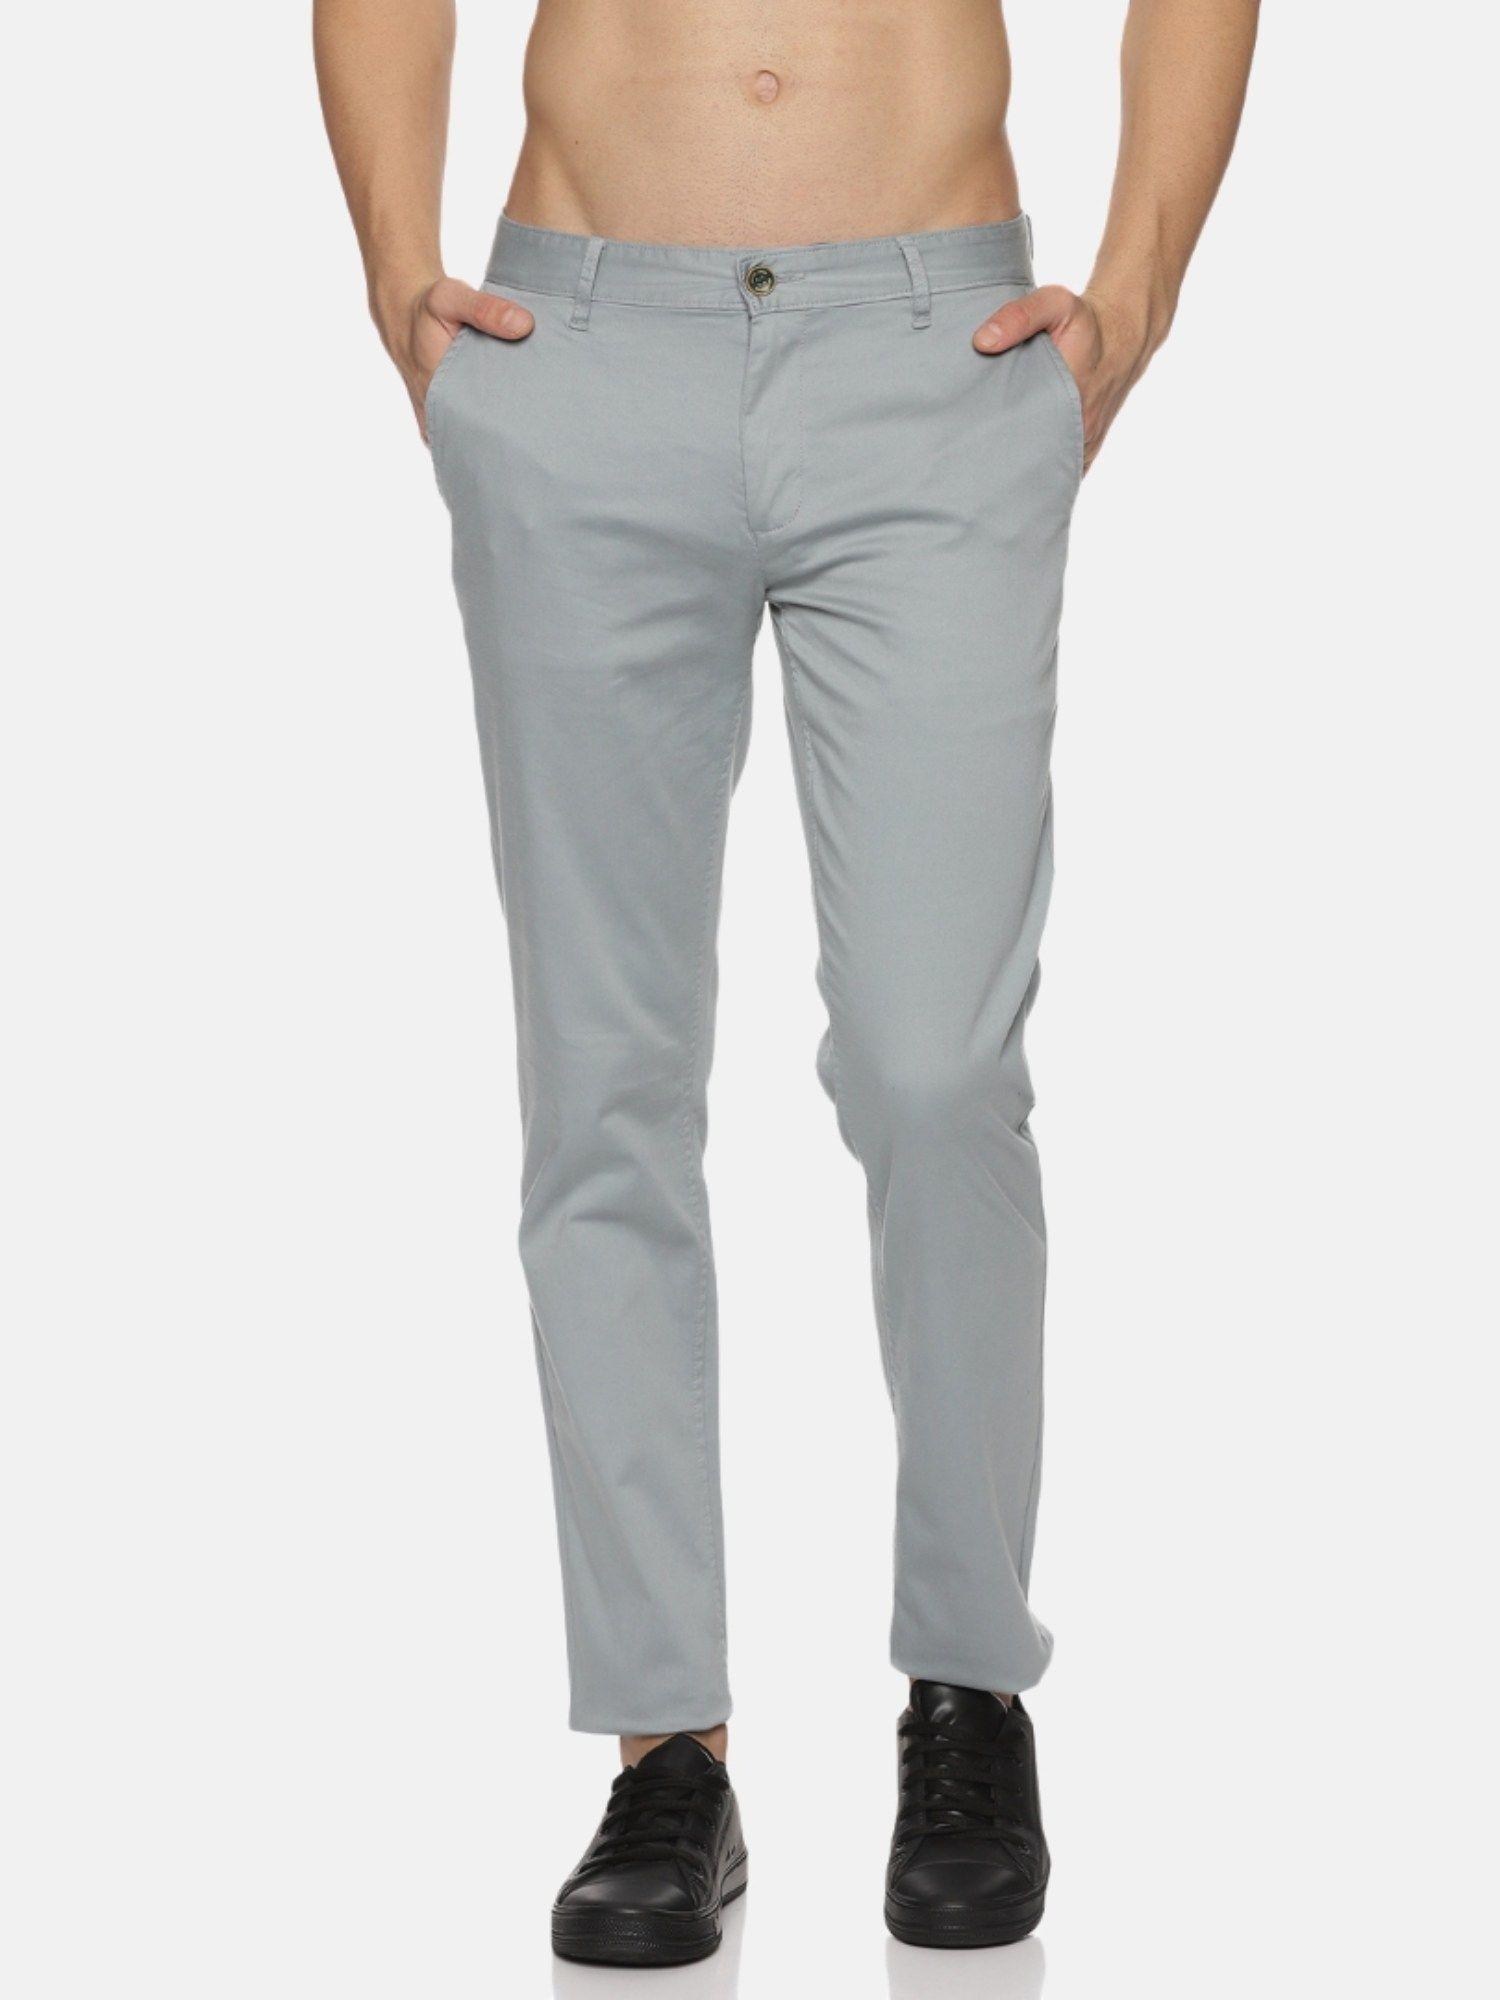 oyster bay trouser